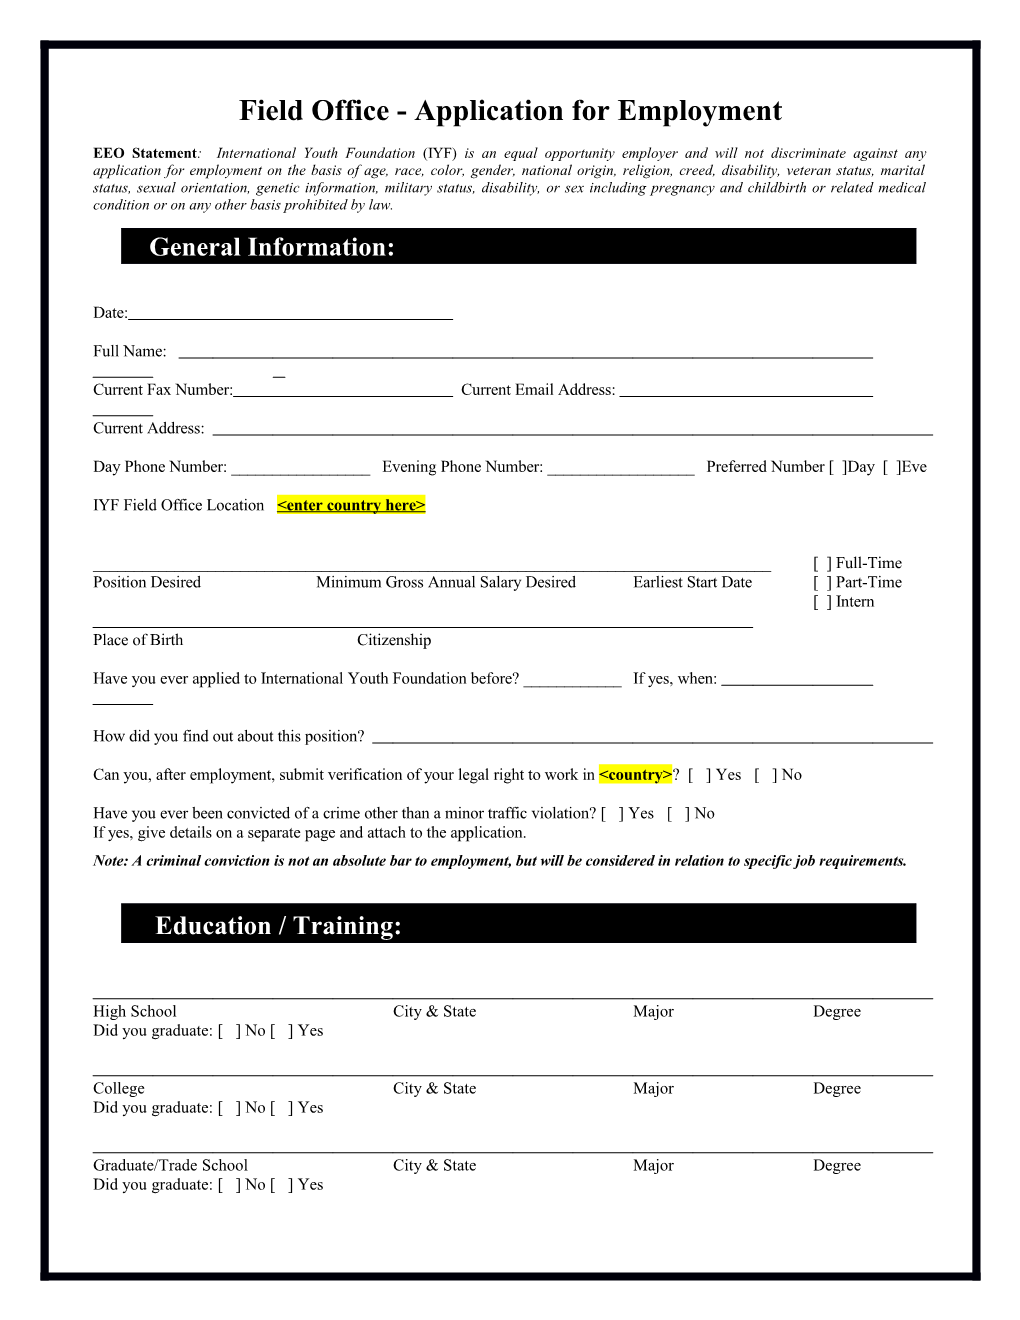 Field Office - Application for Employment